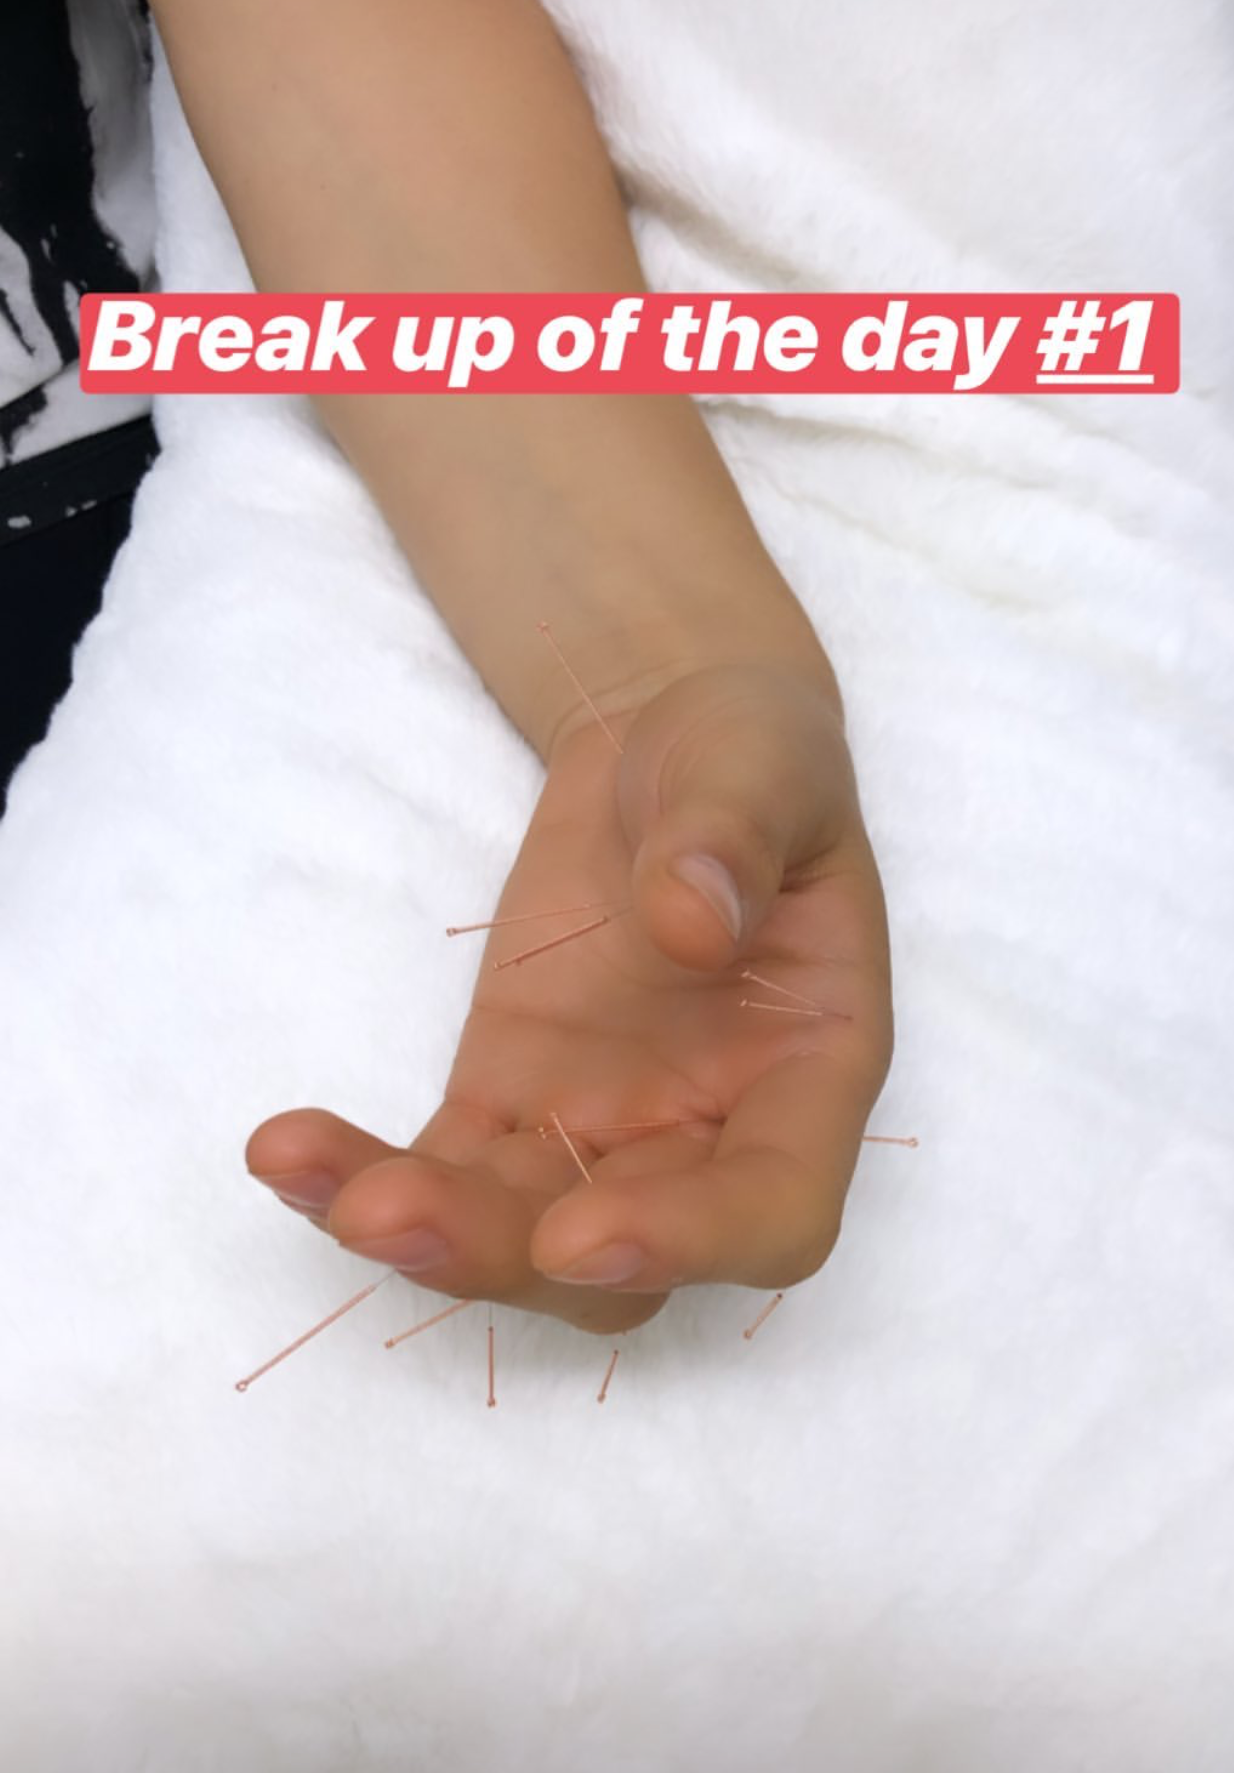  SuJok acupuncture treatment used as an alternative form of couples therapy, in this case for emotional aid in the process of a relationship breakup. 